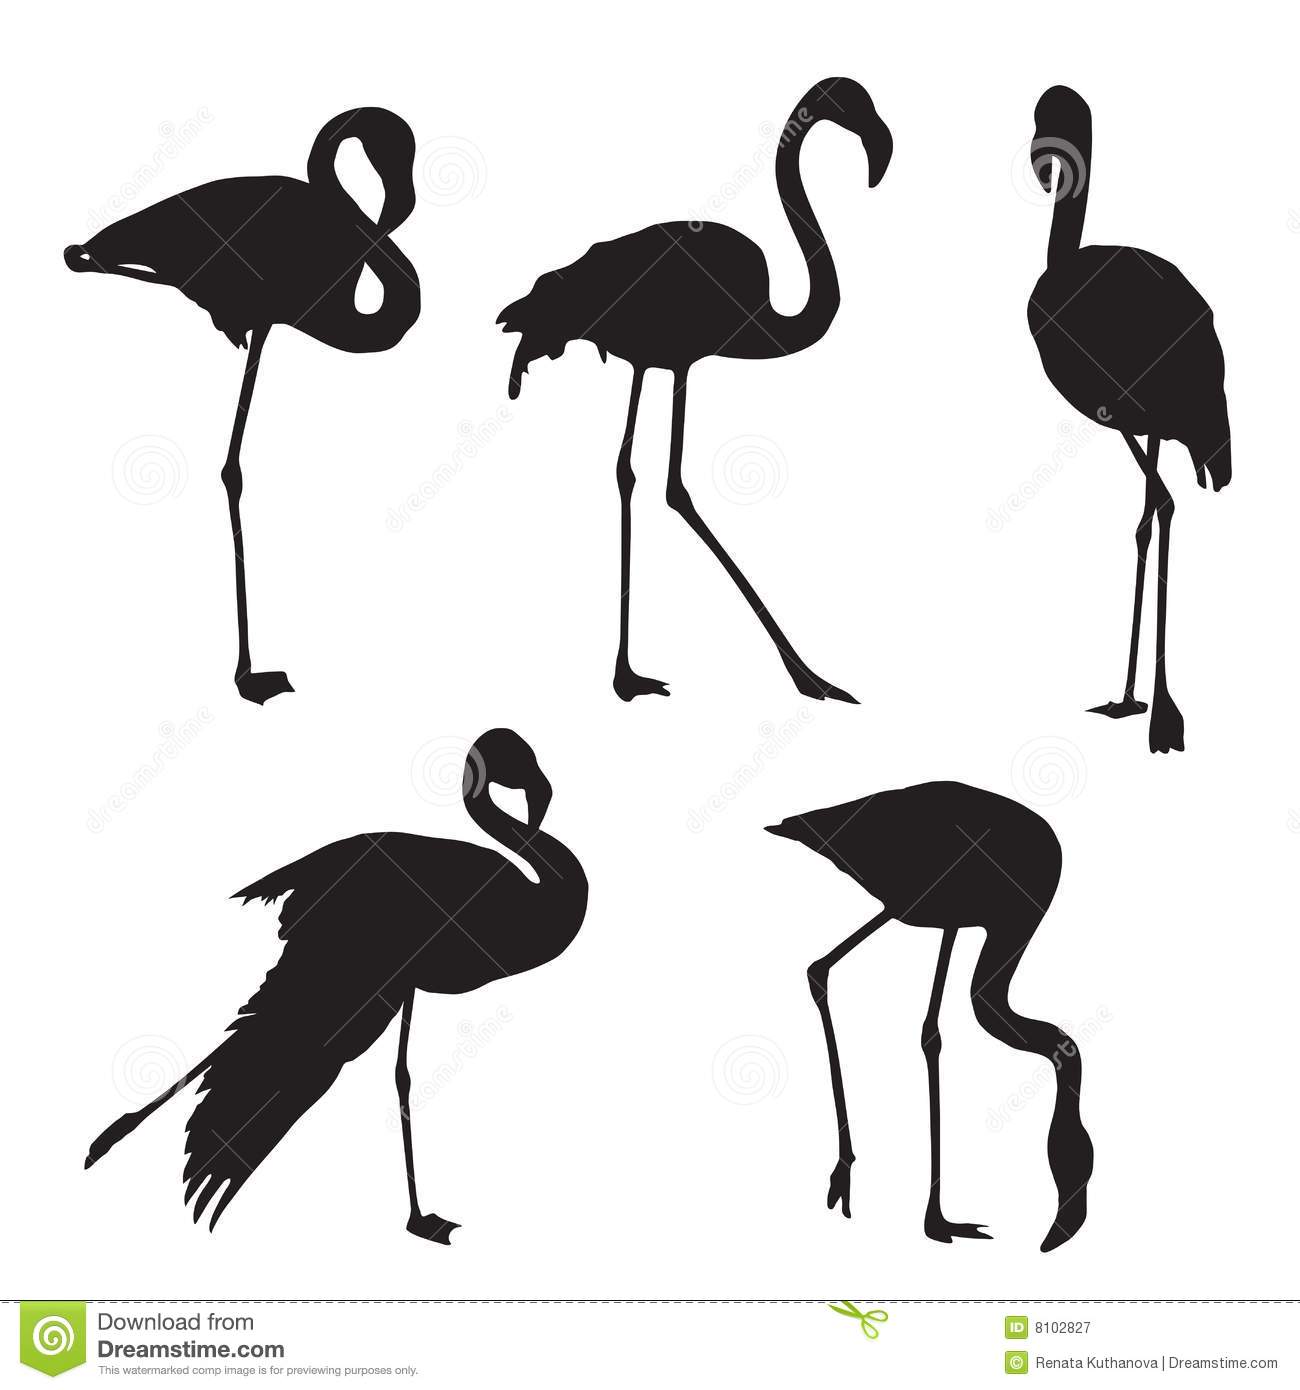 Flamingo Silhouette Royalty Free Stock Photography   Image  8102827